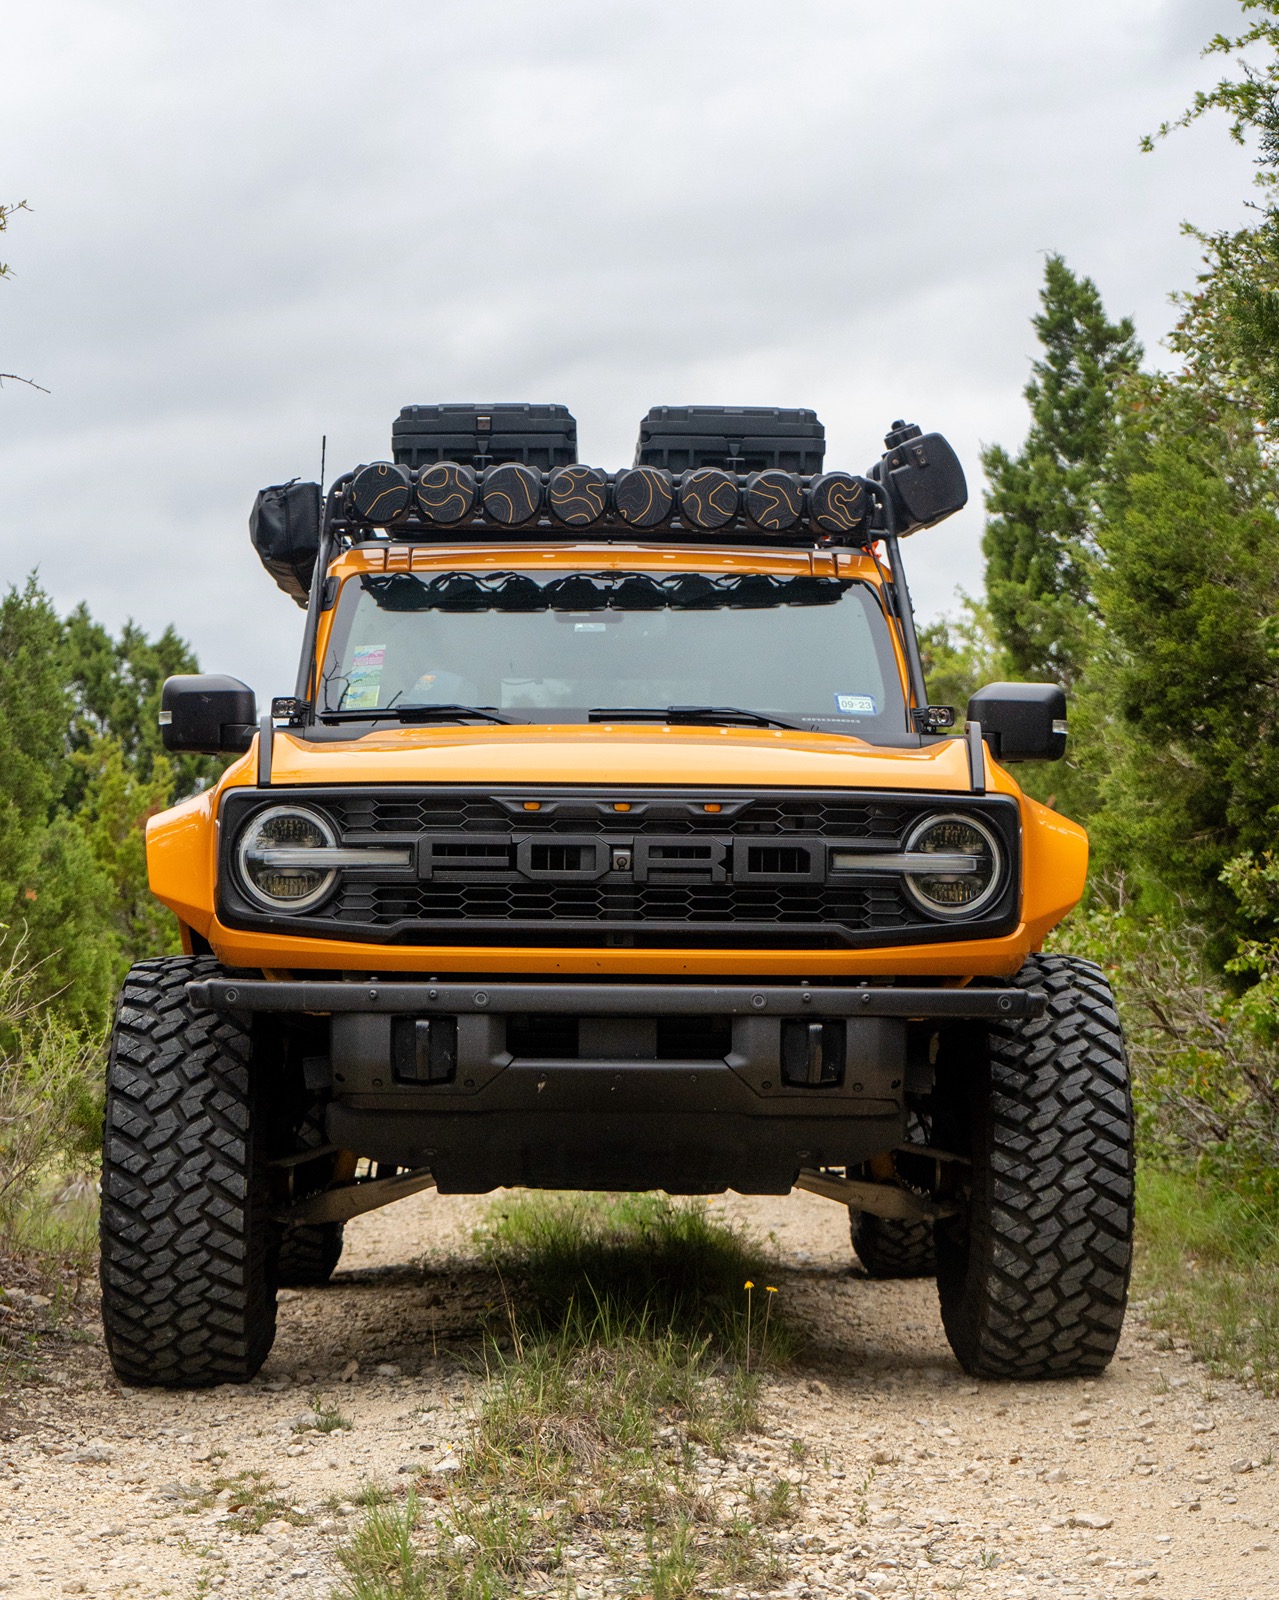 Ford Bronco Front End Friday! Show off your Bronco! 58377582-C4E8-43B5-B9CA-AB229C198498